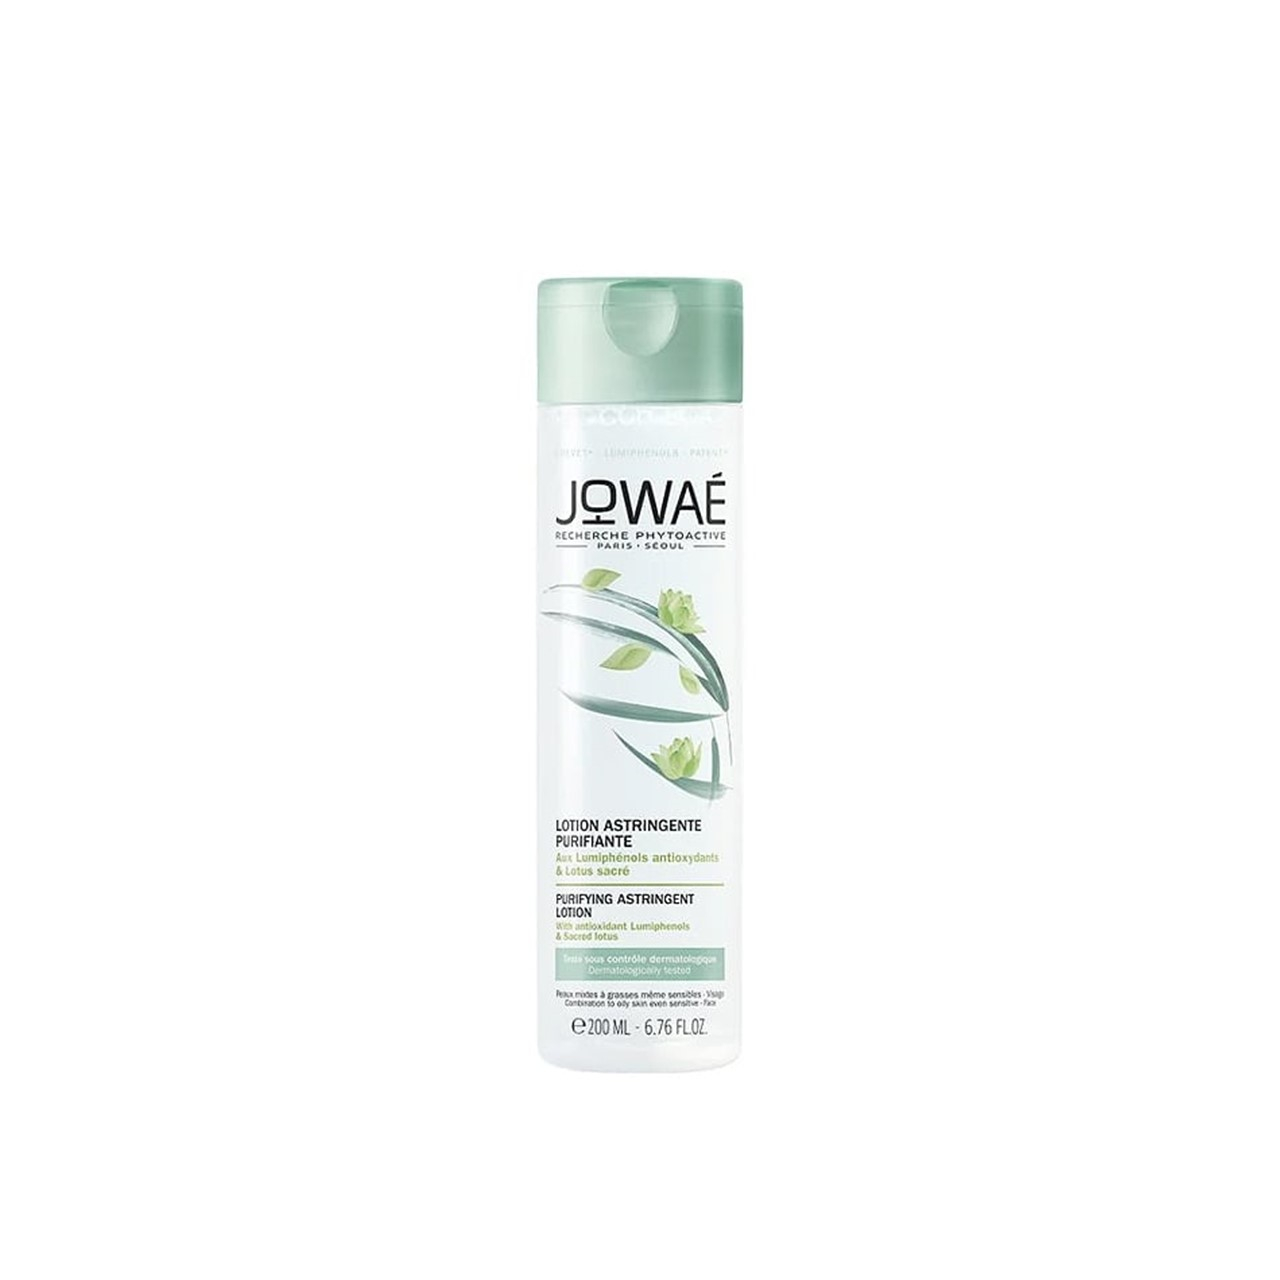 JOWAÉ Purifying Astringent Lotion 200ml